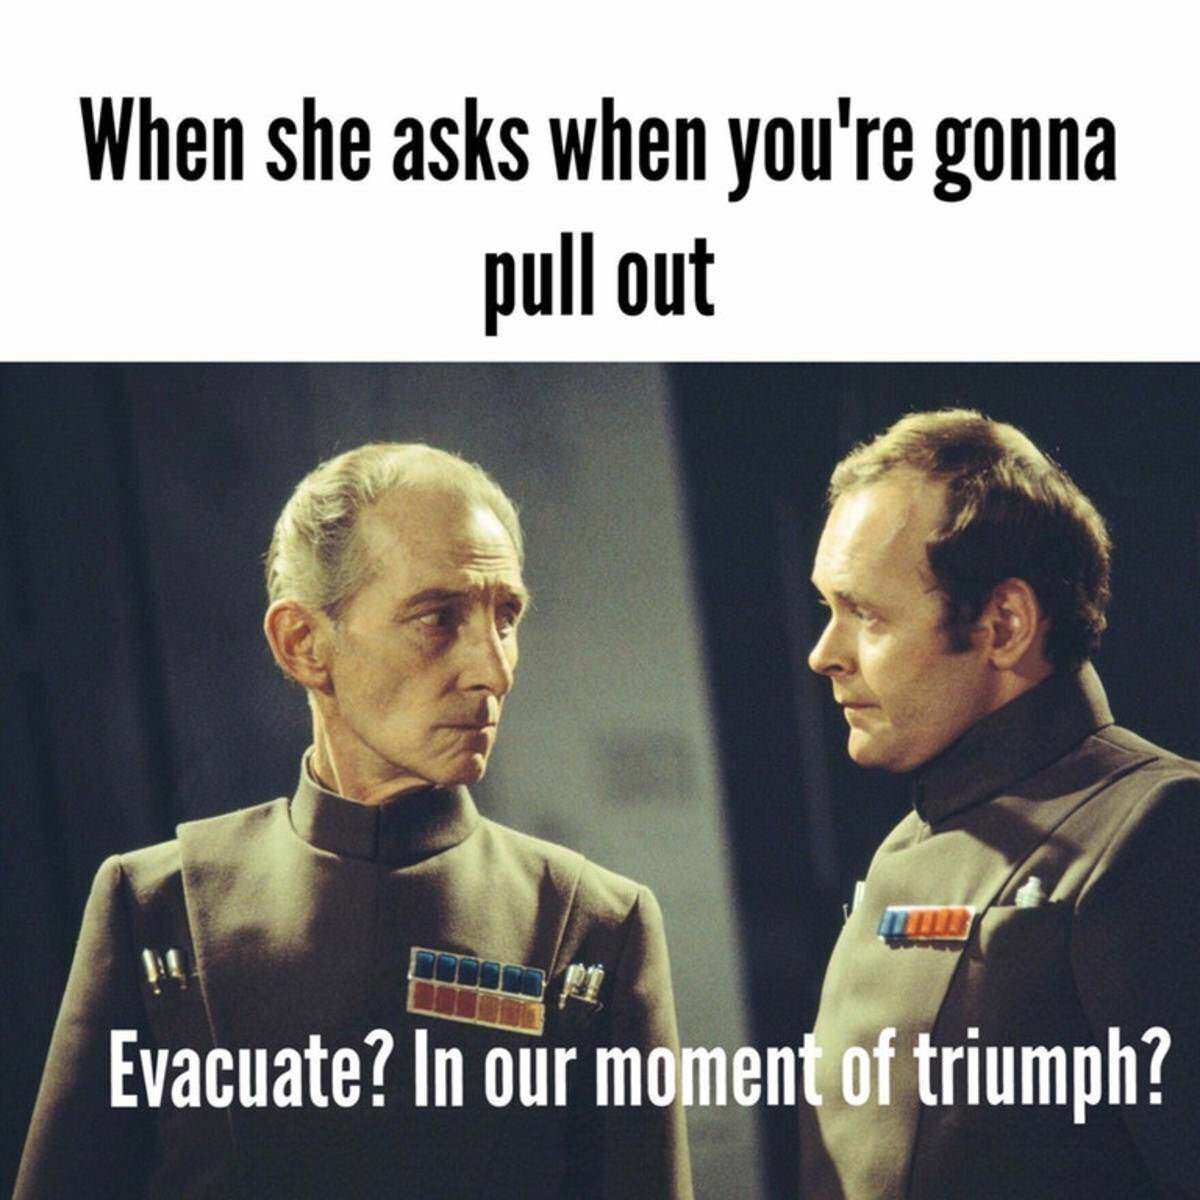 star wars memes sex - When she asks when you're gonna pull out Evacuate? In our moment of triumph?